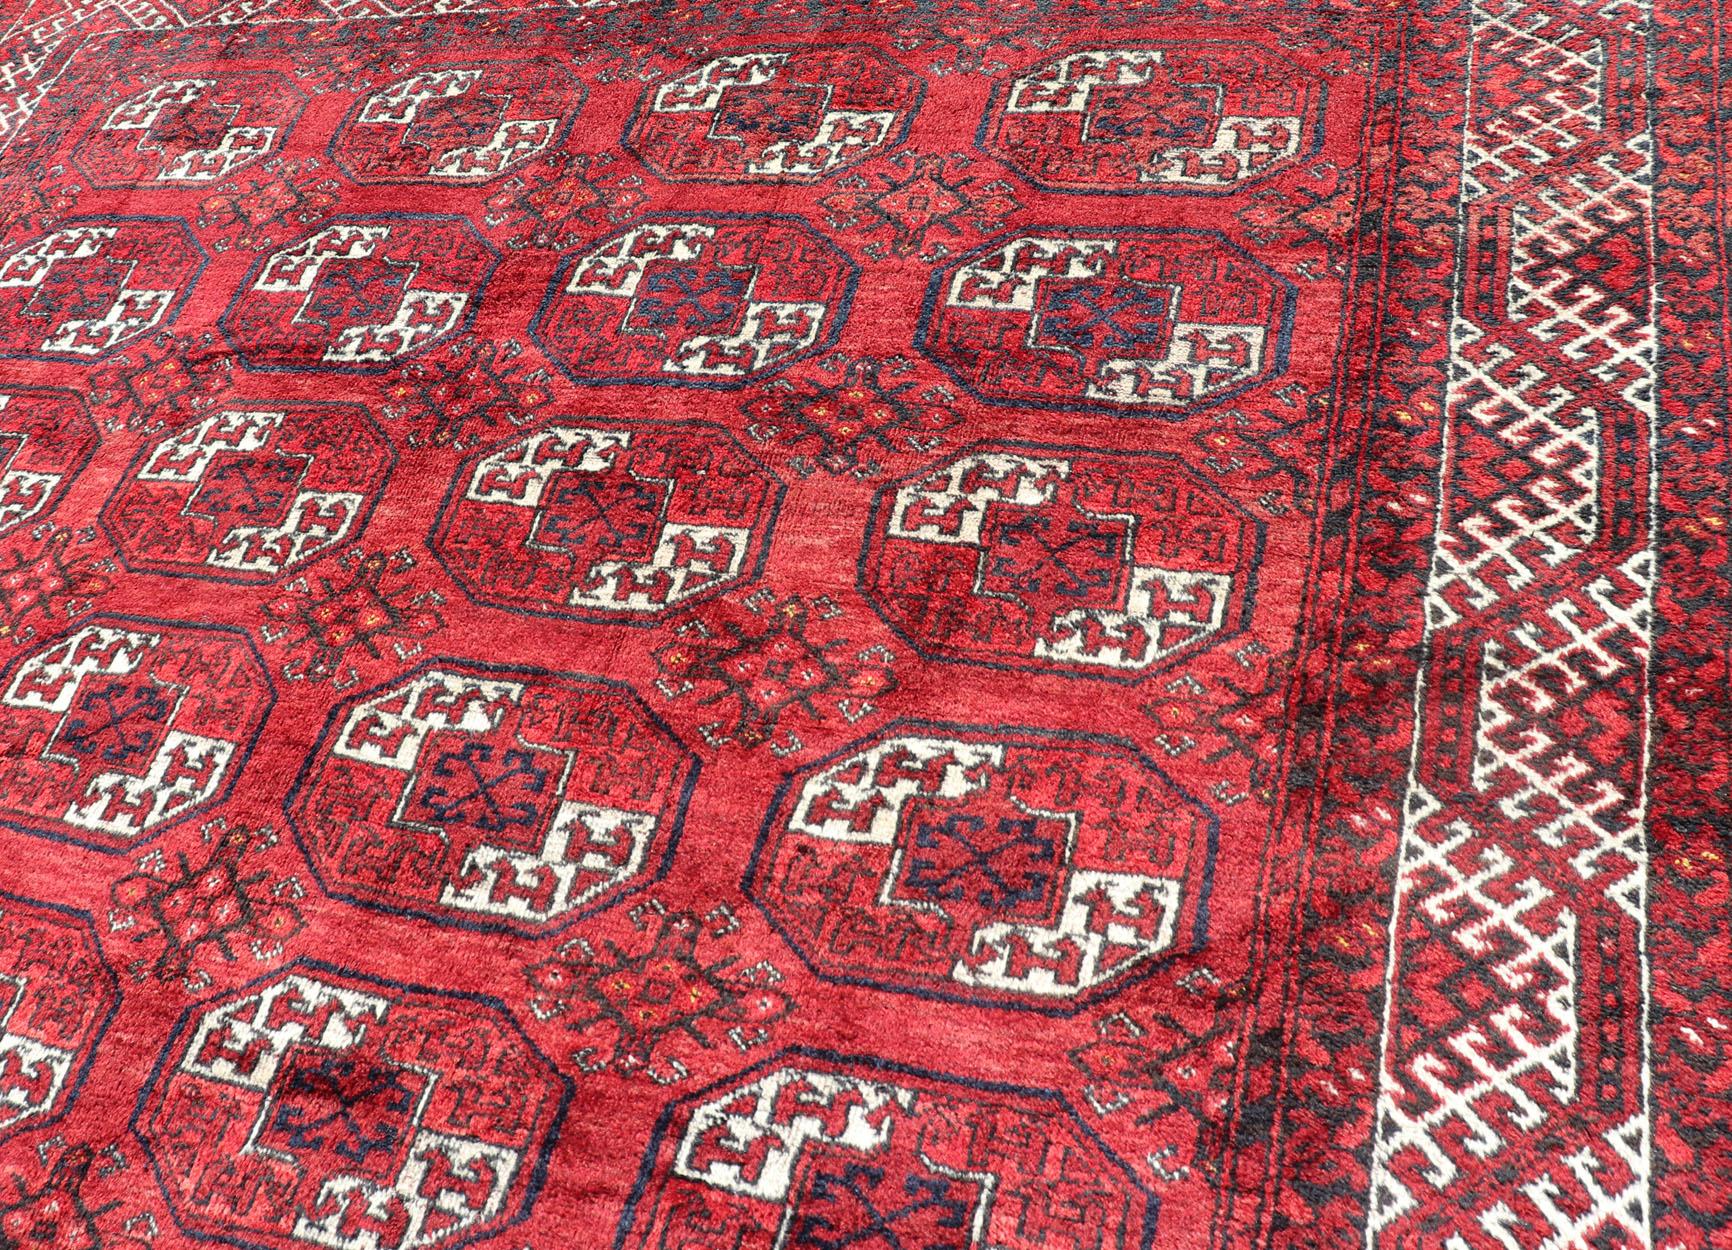 Hand-Knotted Vintage Turkomen Ersari Rug in Wool with Repeating Gul Design. Hand-Knotted Red vintage Ersari Rug with Gul Design, Keivan Woven Arts; rug EMB-9651-P13595, country of origin / type: Turkestan / Ersari, circa 1940s.

Measures: 7'3 x